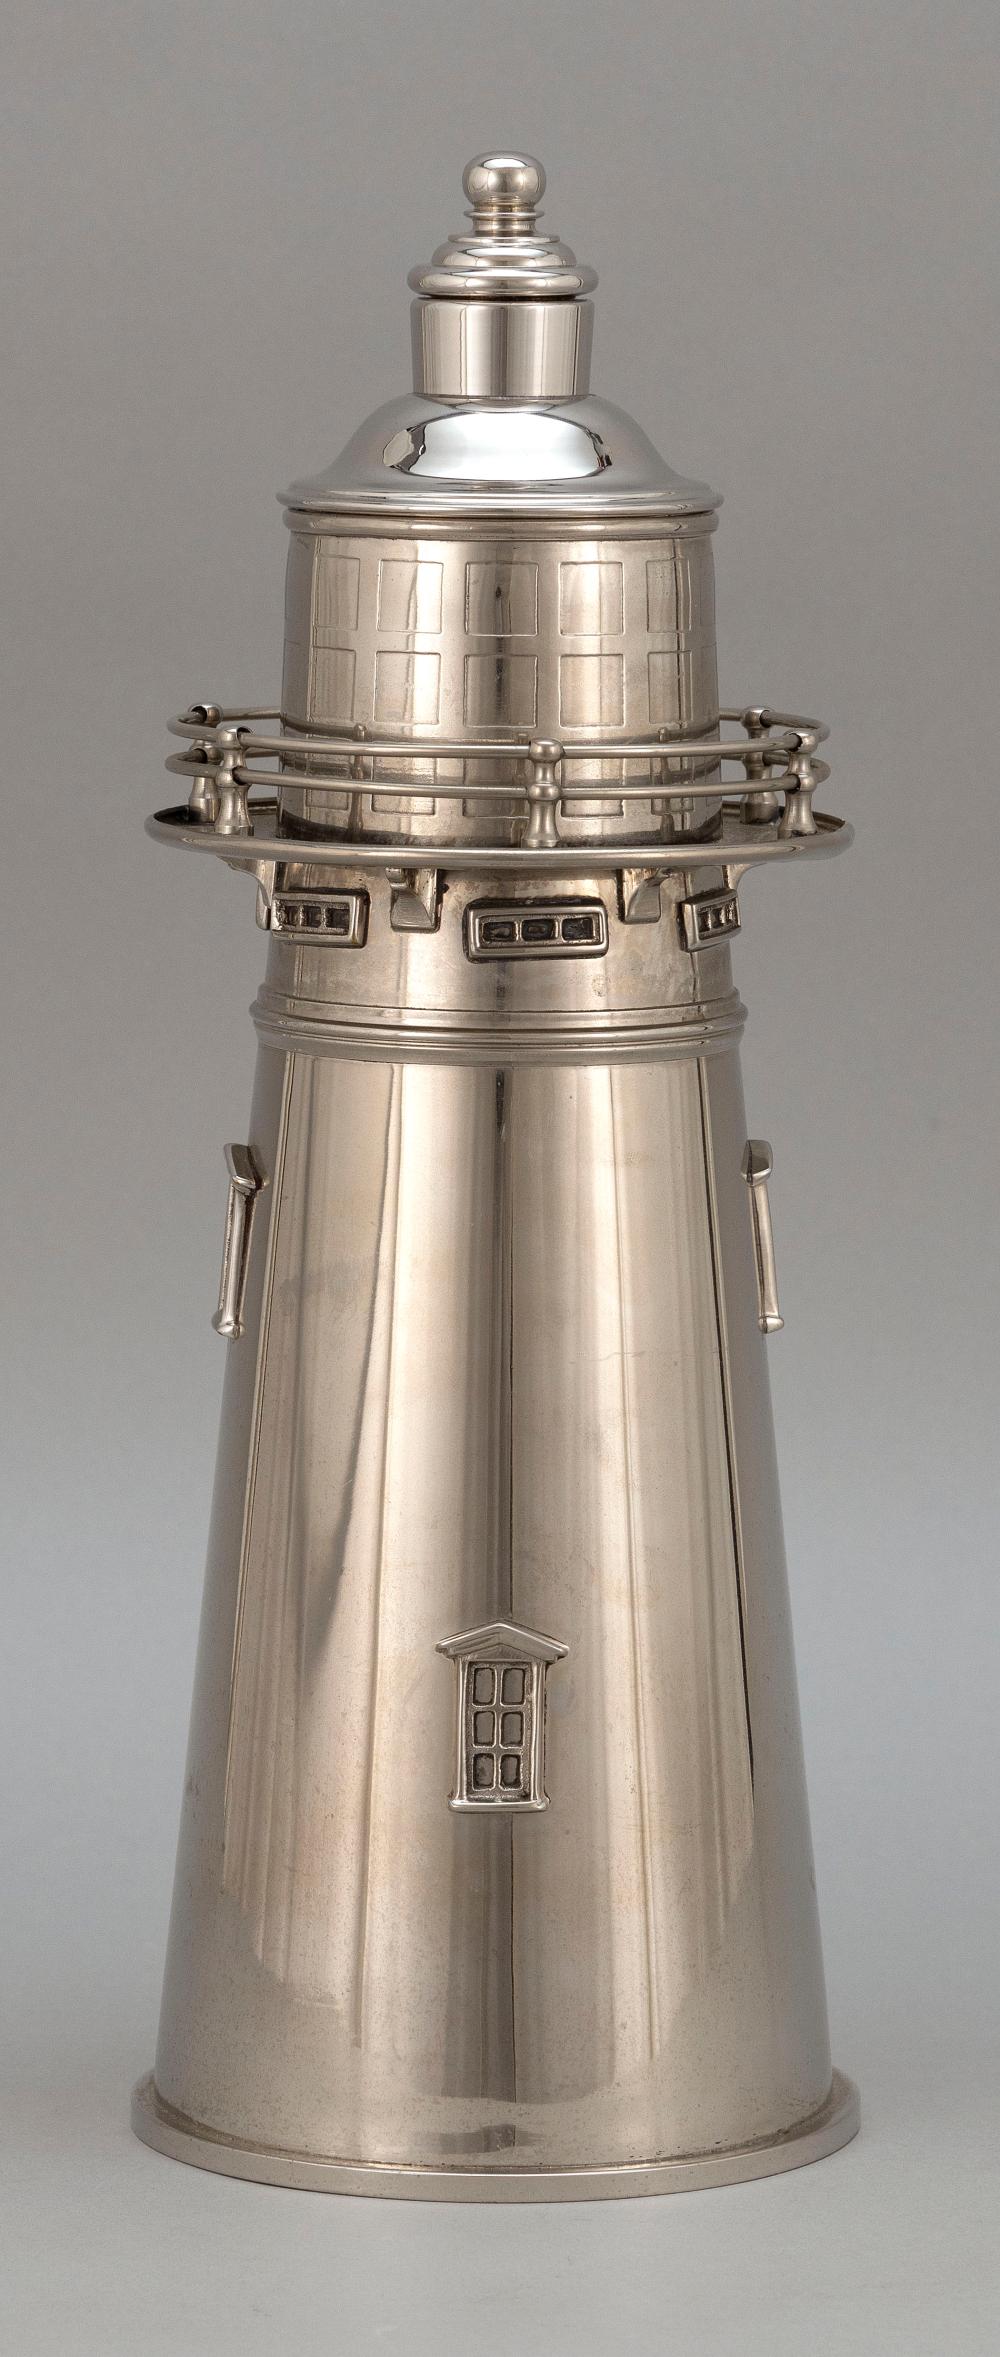 SILVER PLATED LIGHTHOUSE FORM COCKTAIL 34cb62